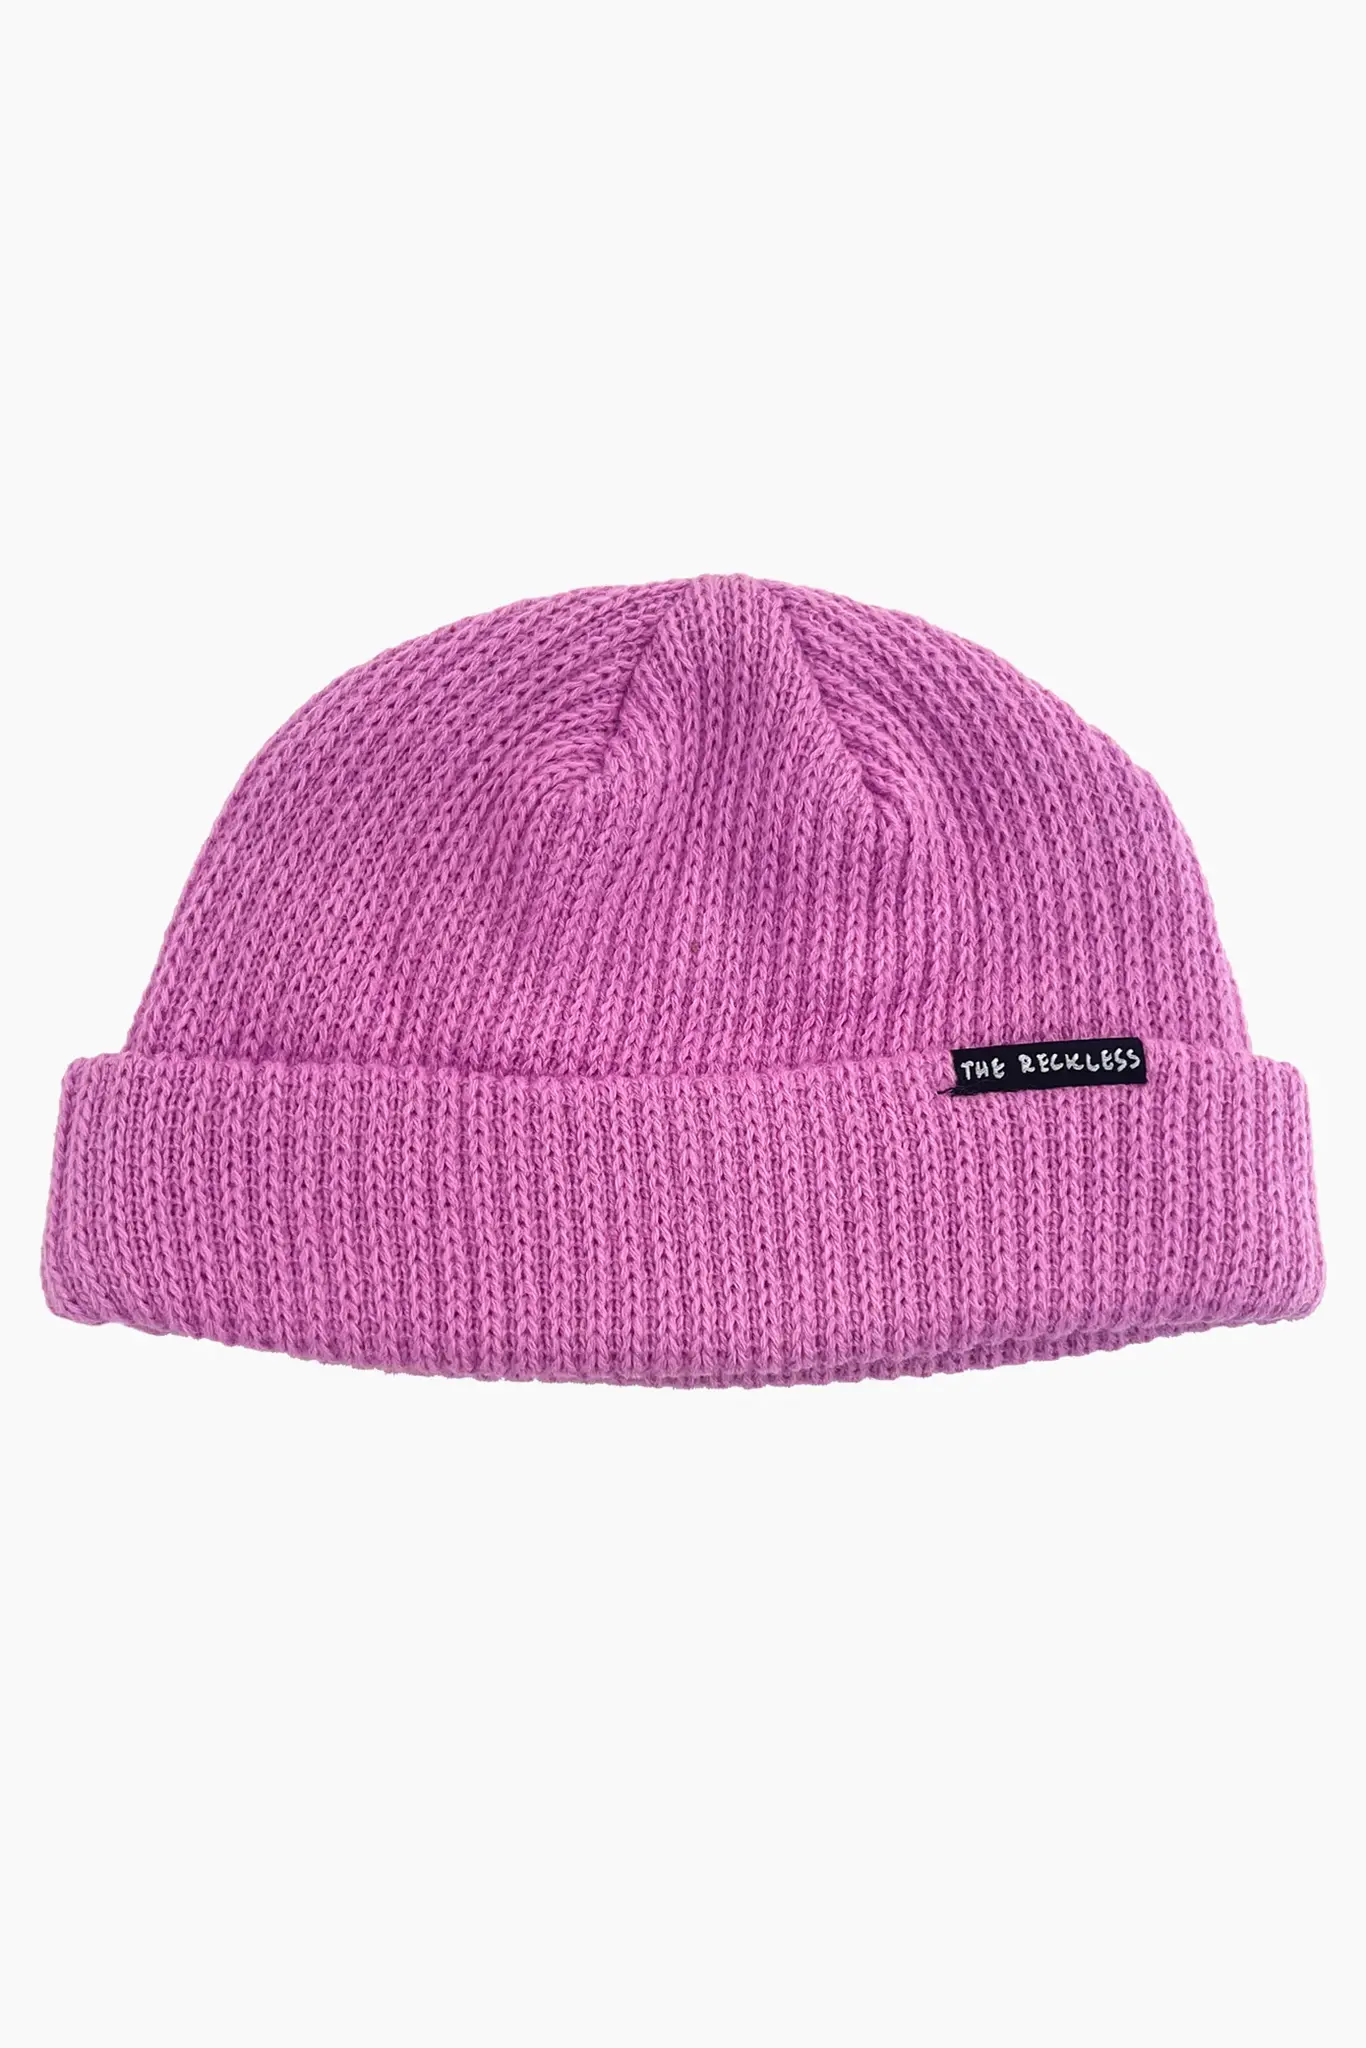 Notice the reckless BLOOM BEANIE PINK